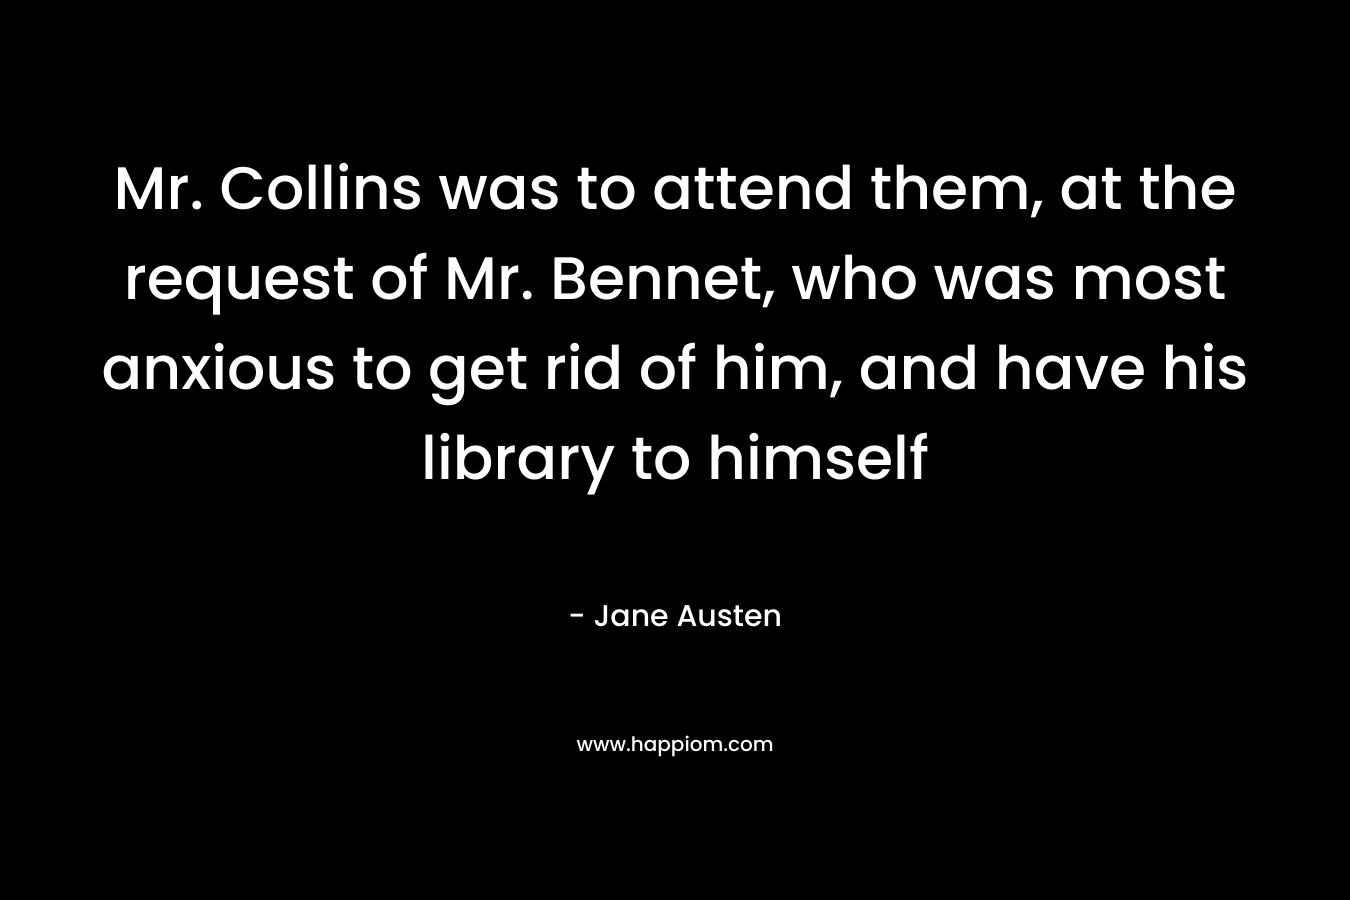 Mr. Collins was to attend them, at the request of Mr. Bennet, who was most anxious to get rid of him, and have his library to himself – Jane Austen